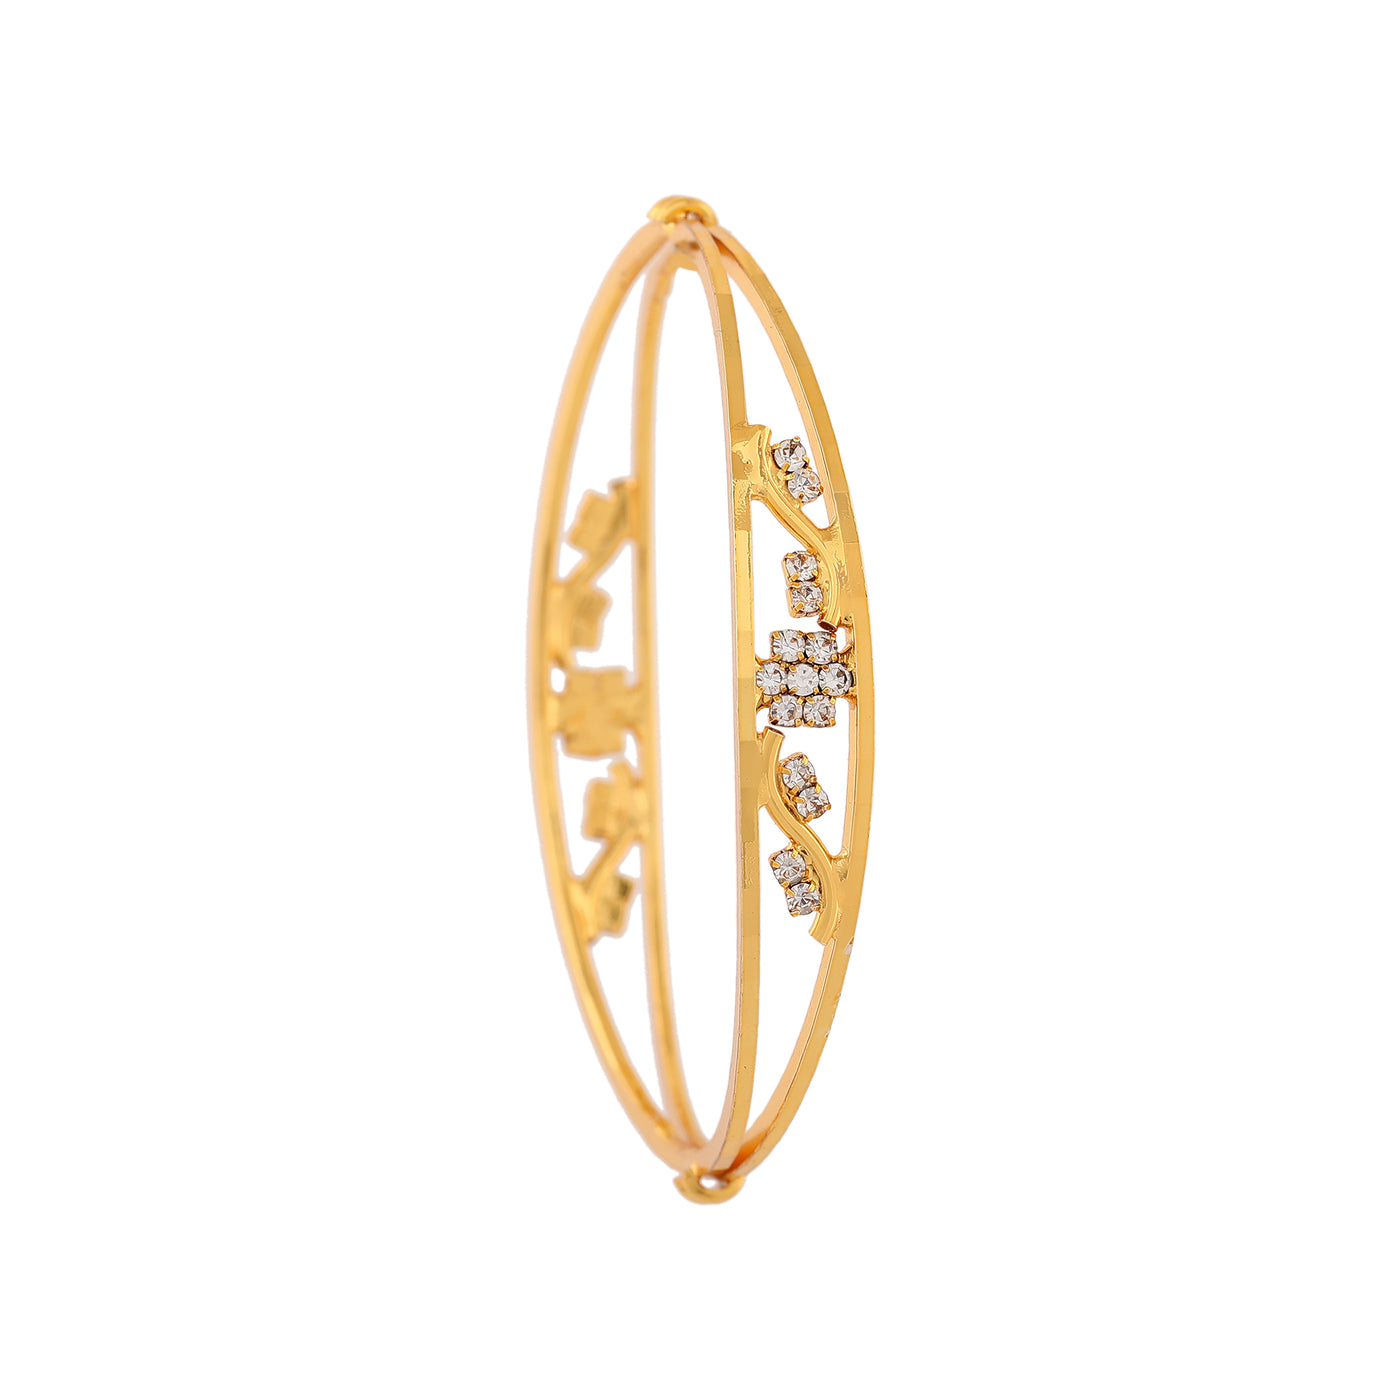 Estele Gold Plated Blooming Designer Bangle with Crystals for Women